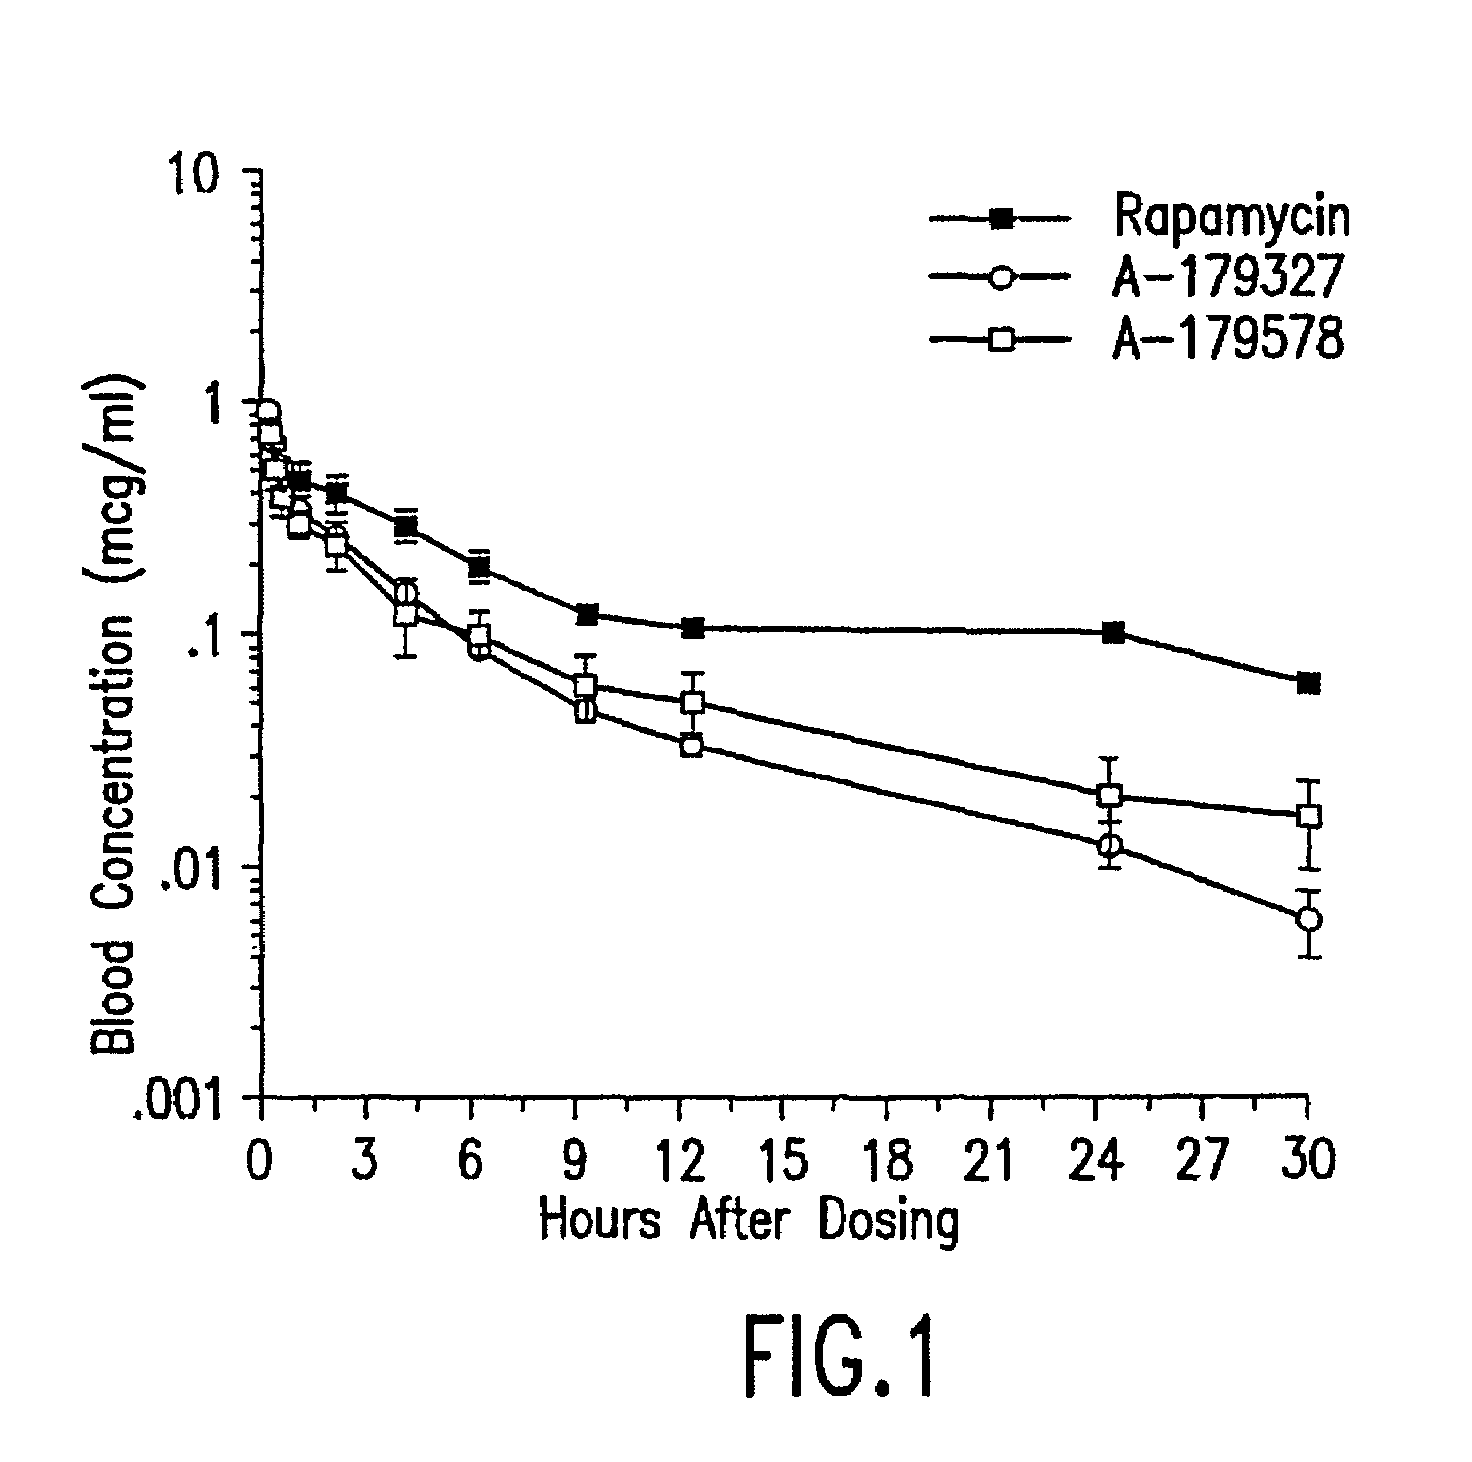 Methods of administering tetrazole-containing rapamycin analogs with other therapeutic substances using medical devices